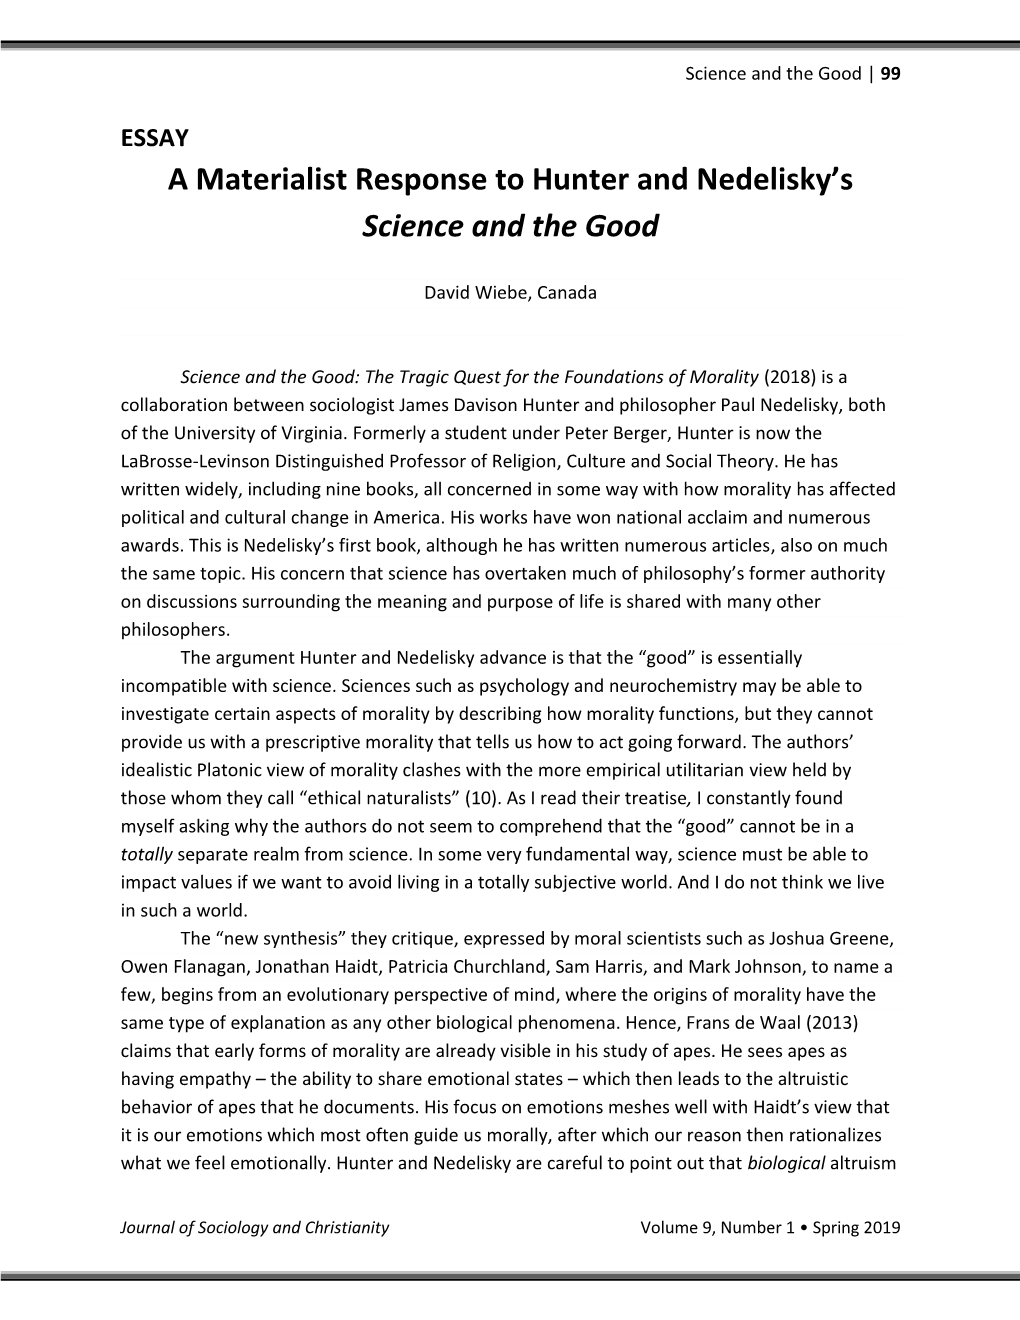 A Materialist Response to Hunter and Nedelisky's Science and the Good